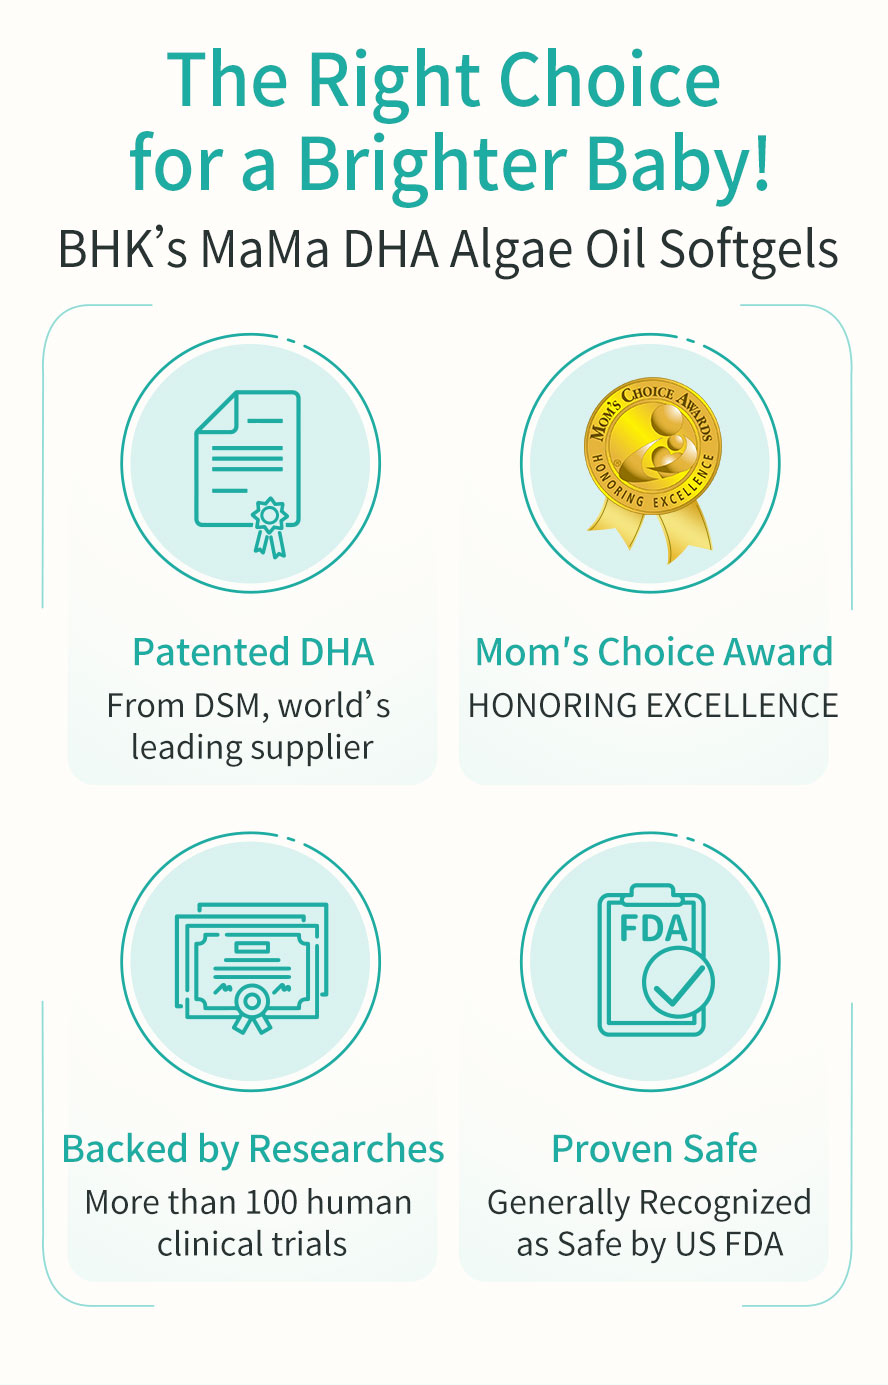 BHK's uses the best source DHA algae oil without organic solvents, important to aid baby's development 